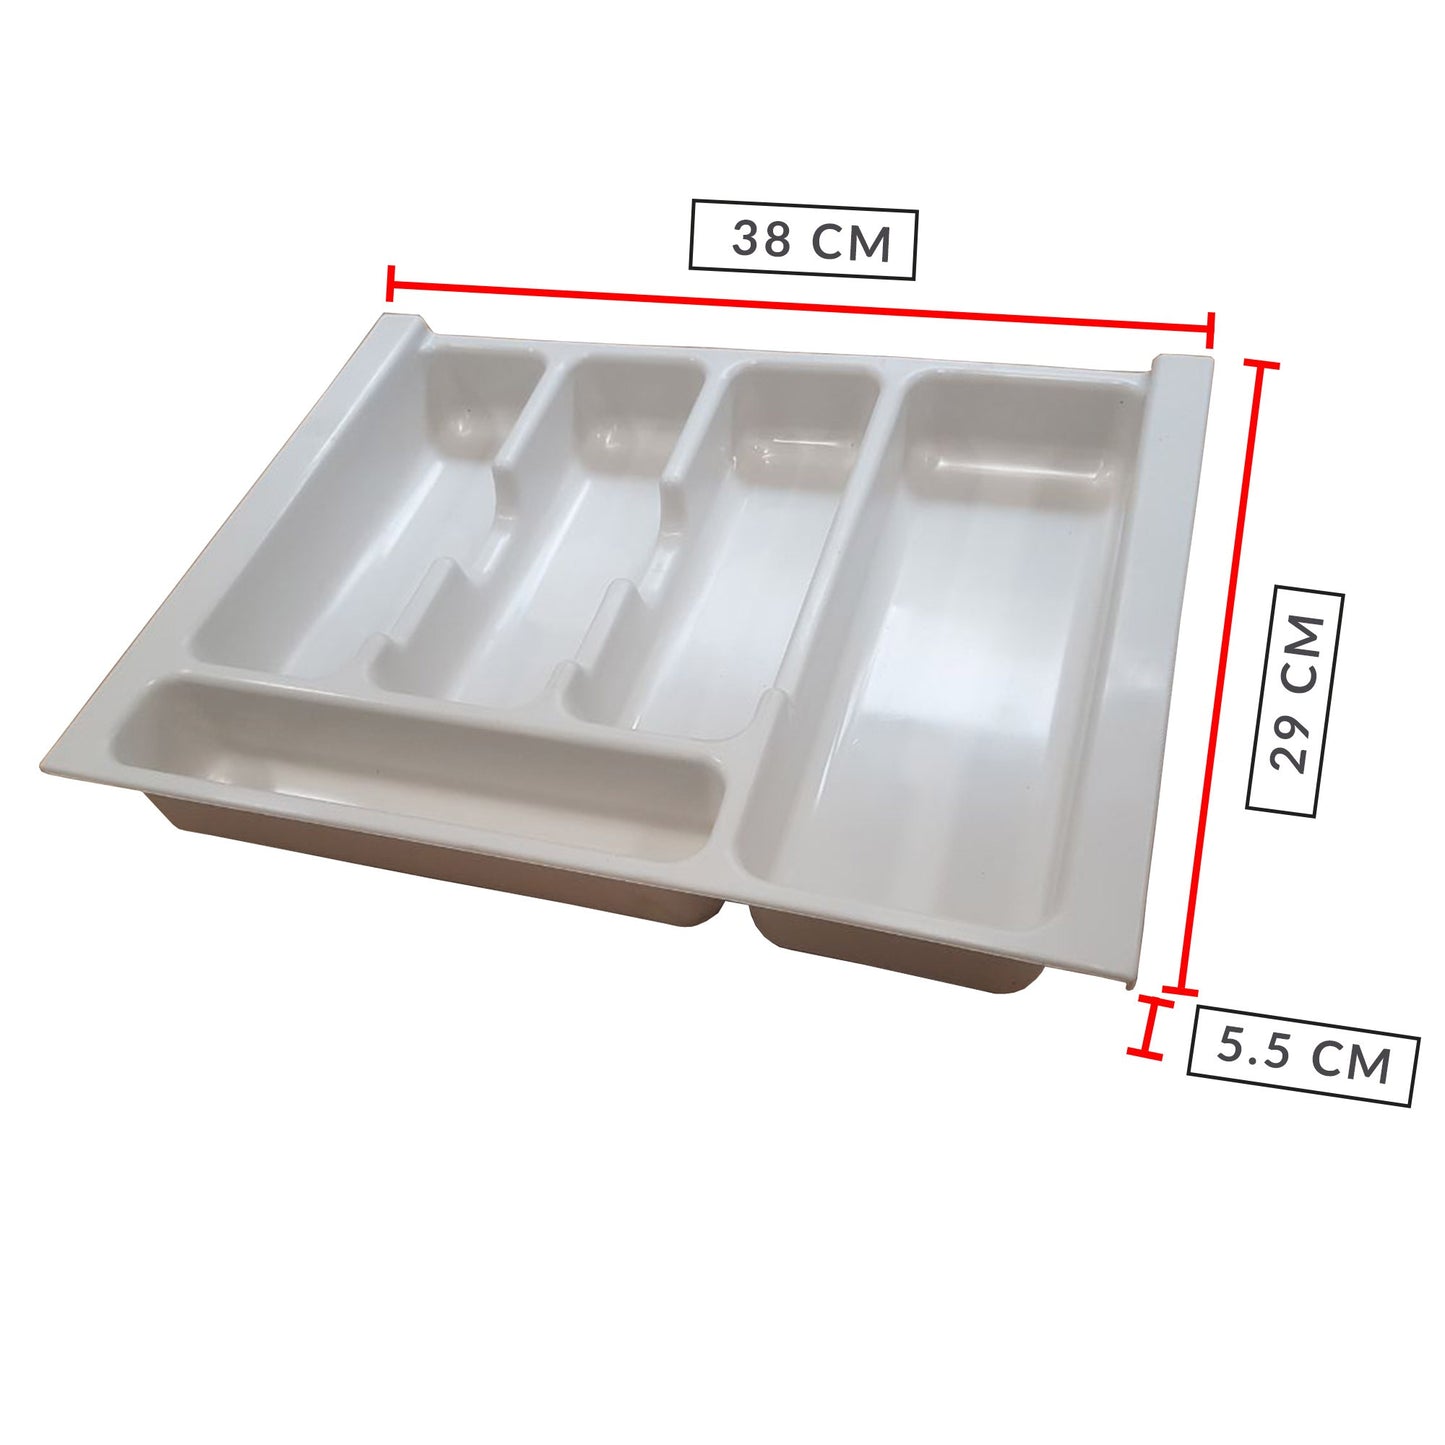 VW Crafter / MAN TGE Cutlery Tray For Self-build Campers, Conversions